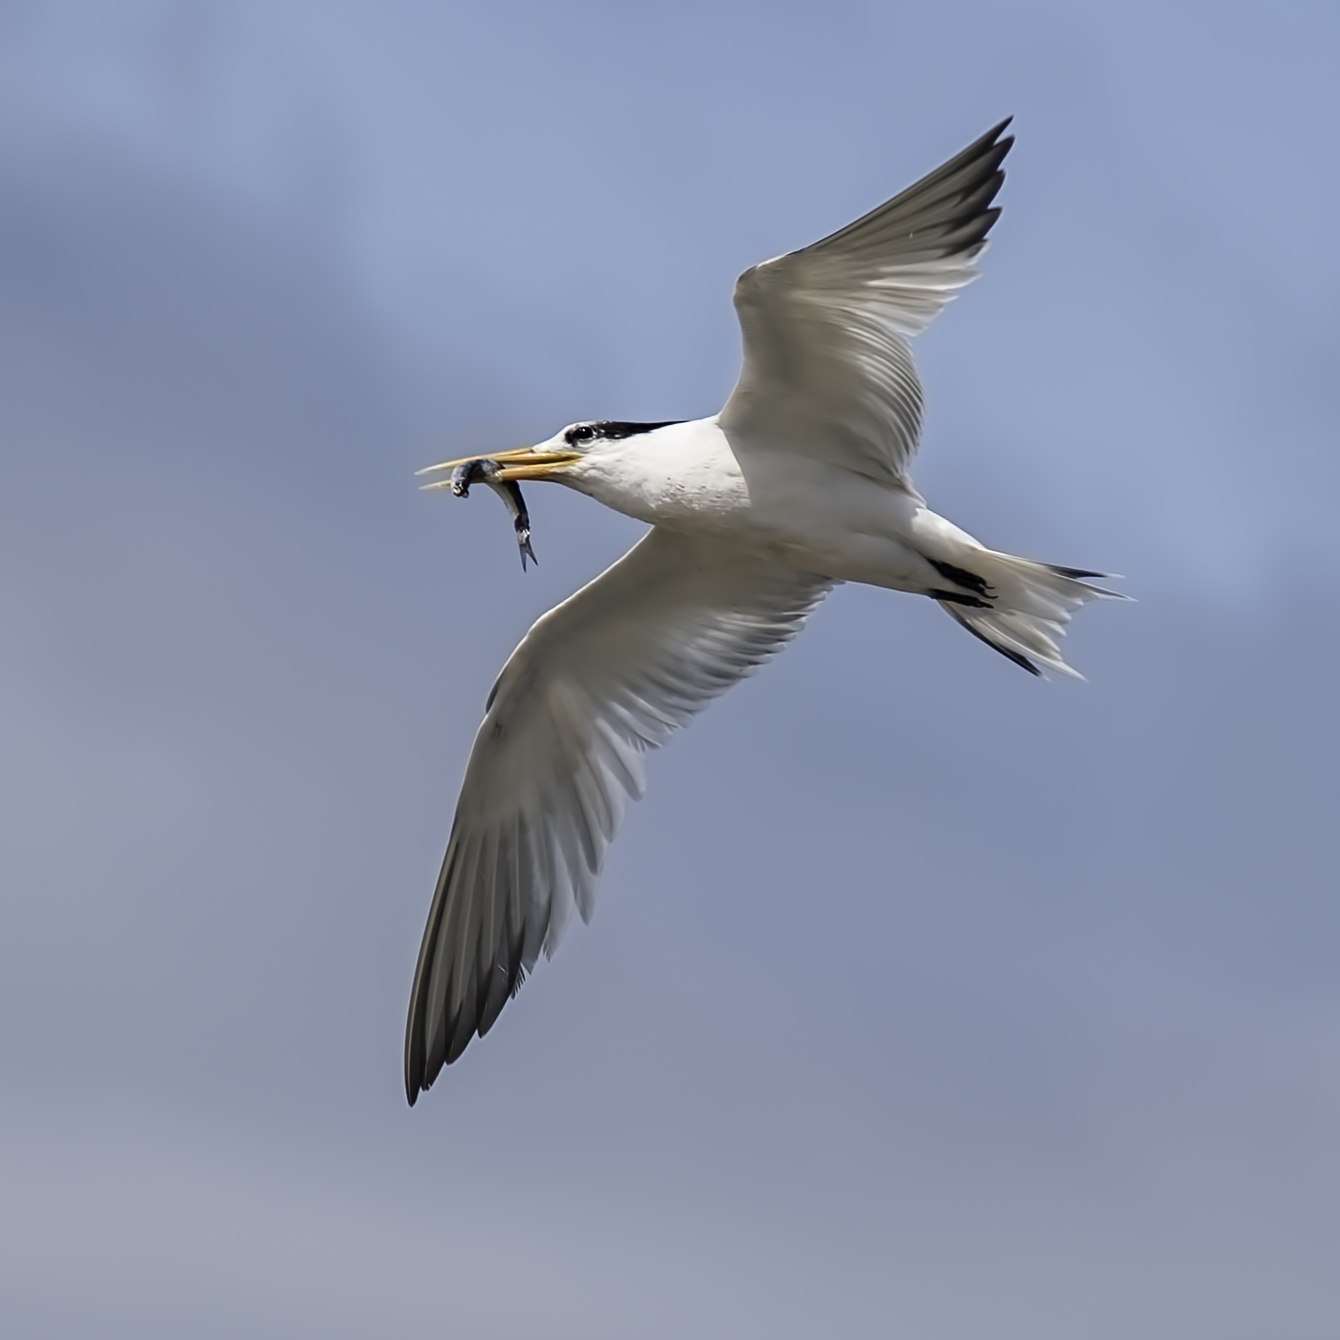 Tern with Fish Common tern in flight, with fish in beak by Denise Buckley Crawford